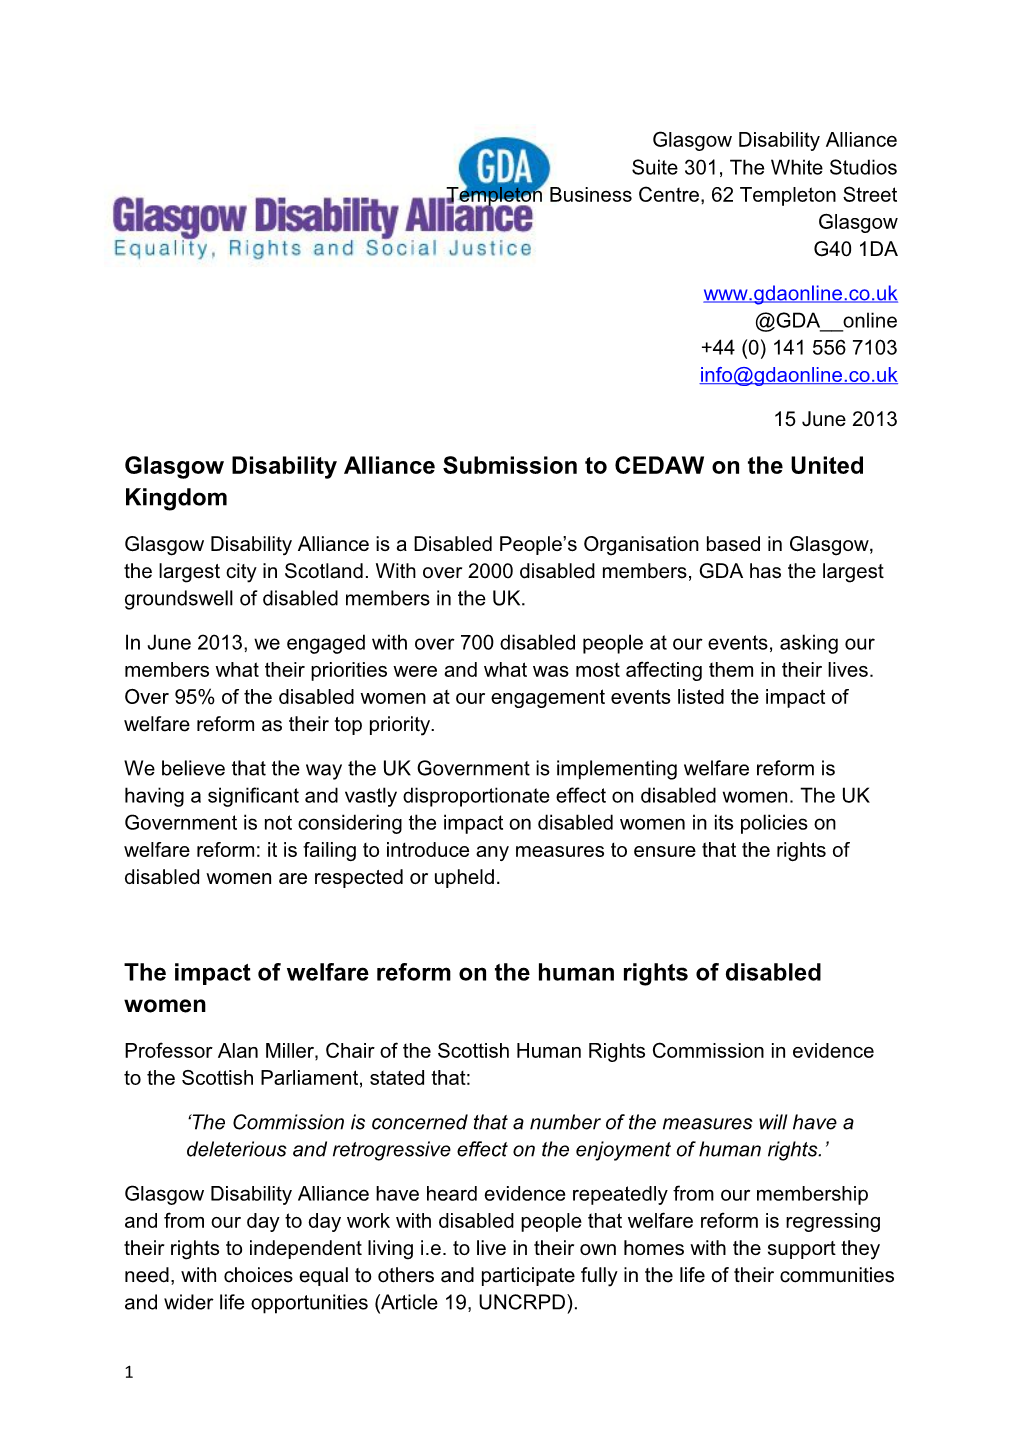 Glasgow Disability Alliance Submission to CEDAW on the United Kingdom